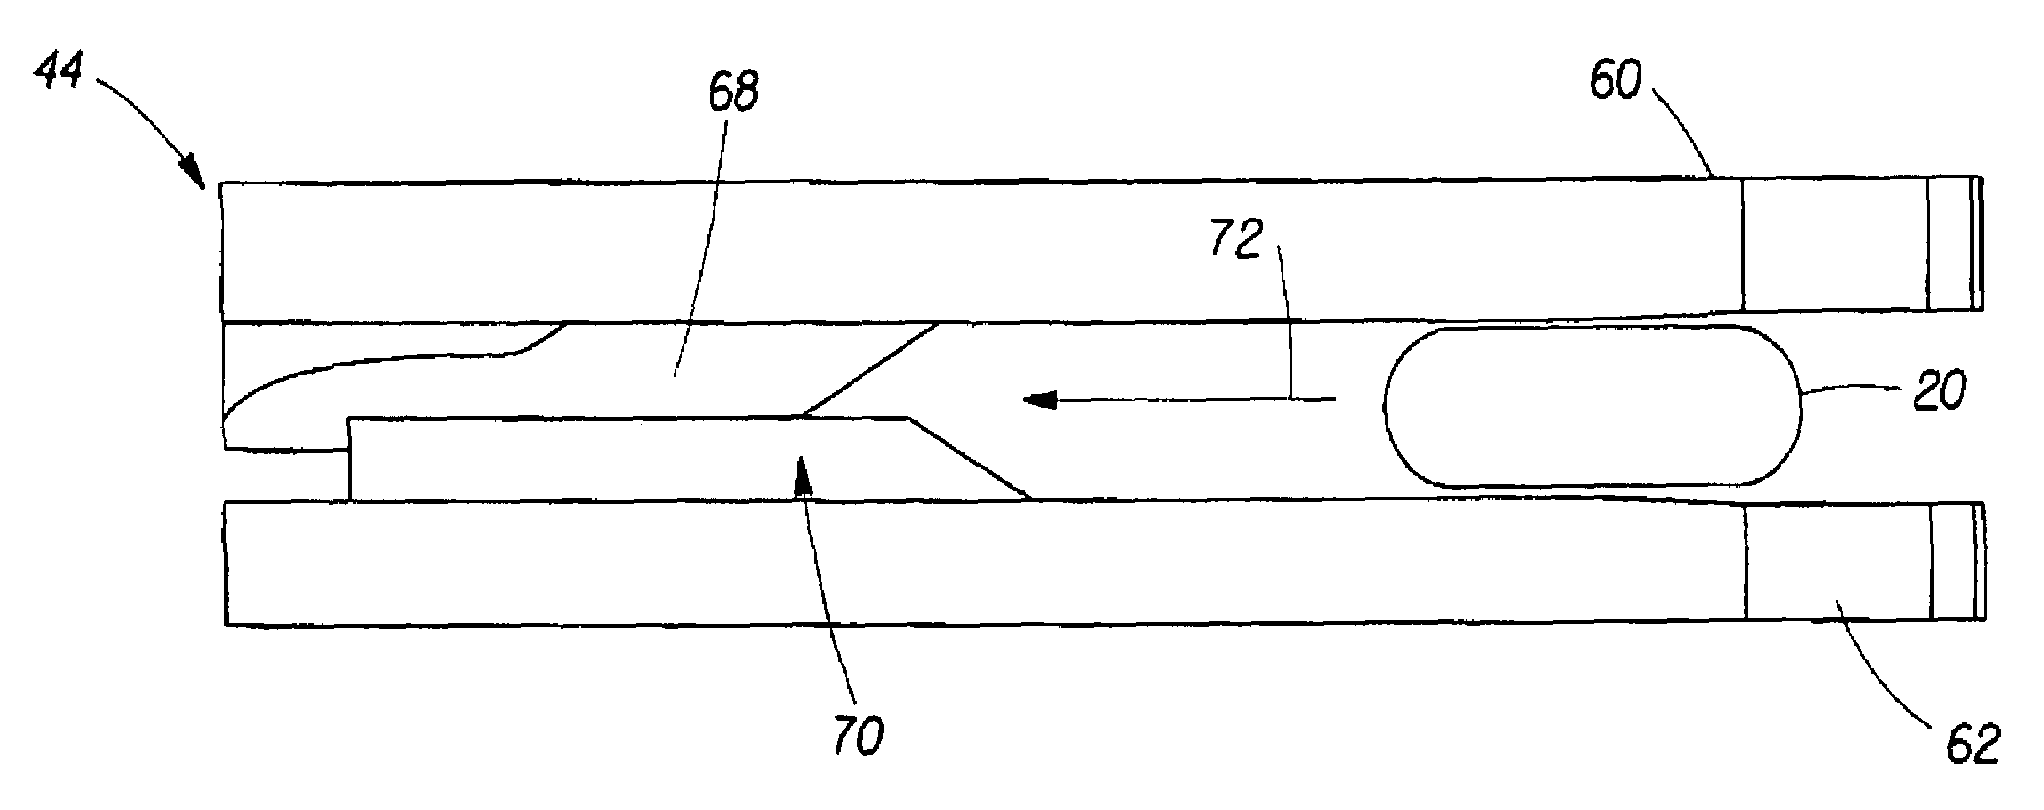 Folding system and process for a continuous moving web operation